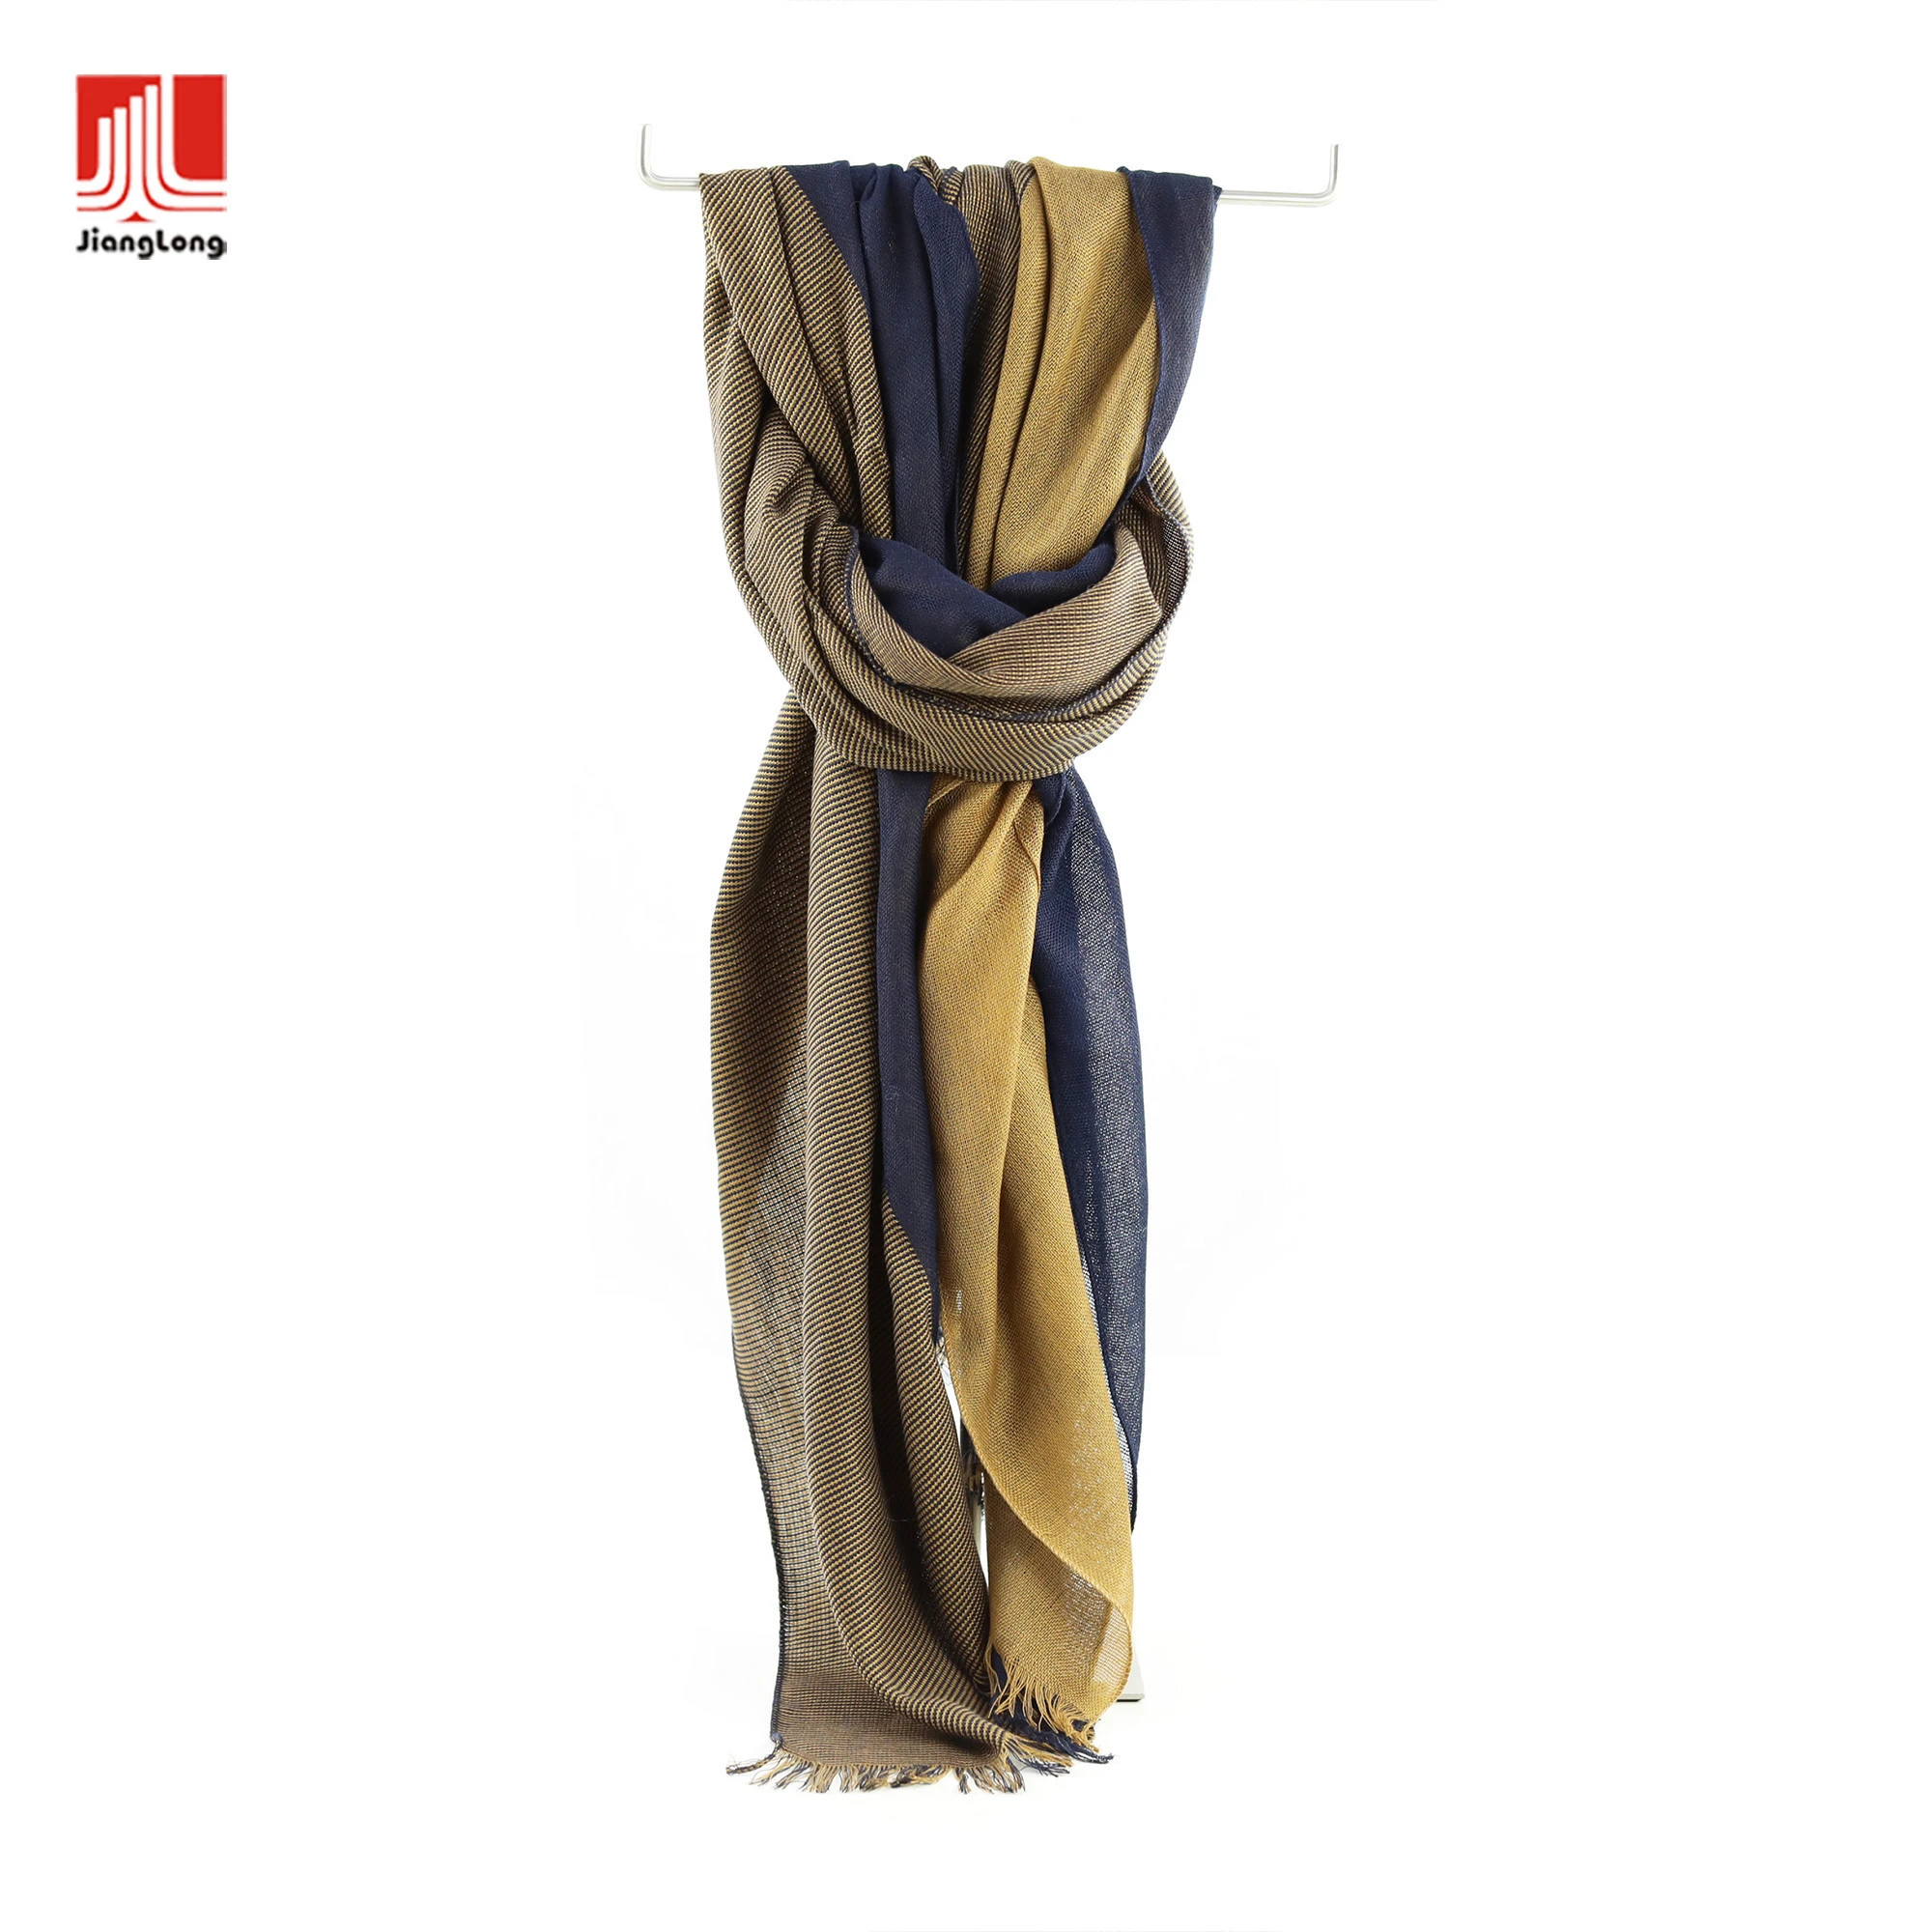 Lightweight woven hair scarf cozy soft enhanced textures scarves shawls half double layers solid to tiny stripes pashmina